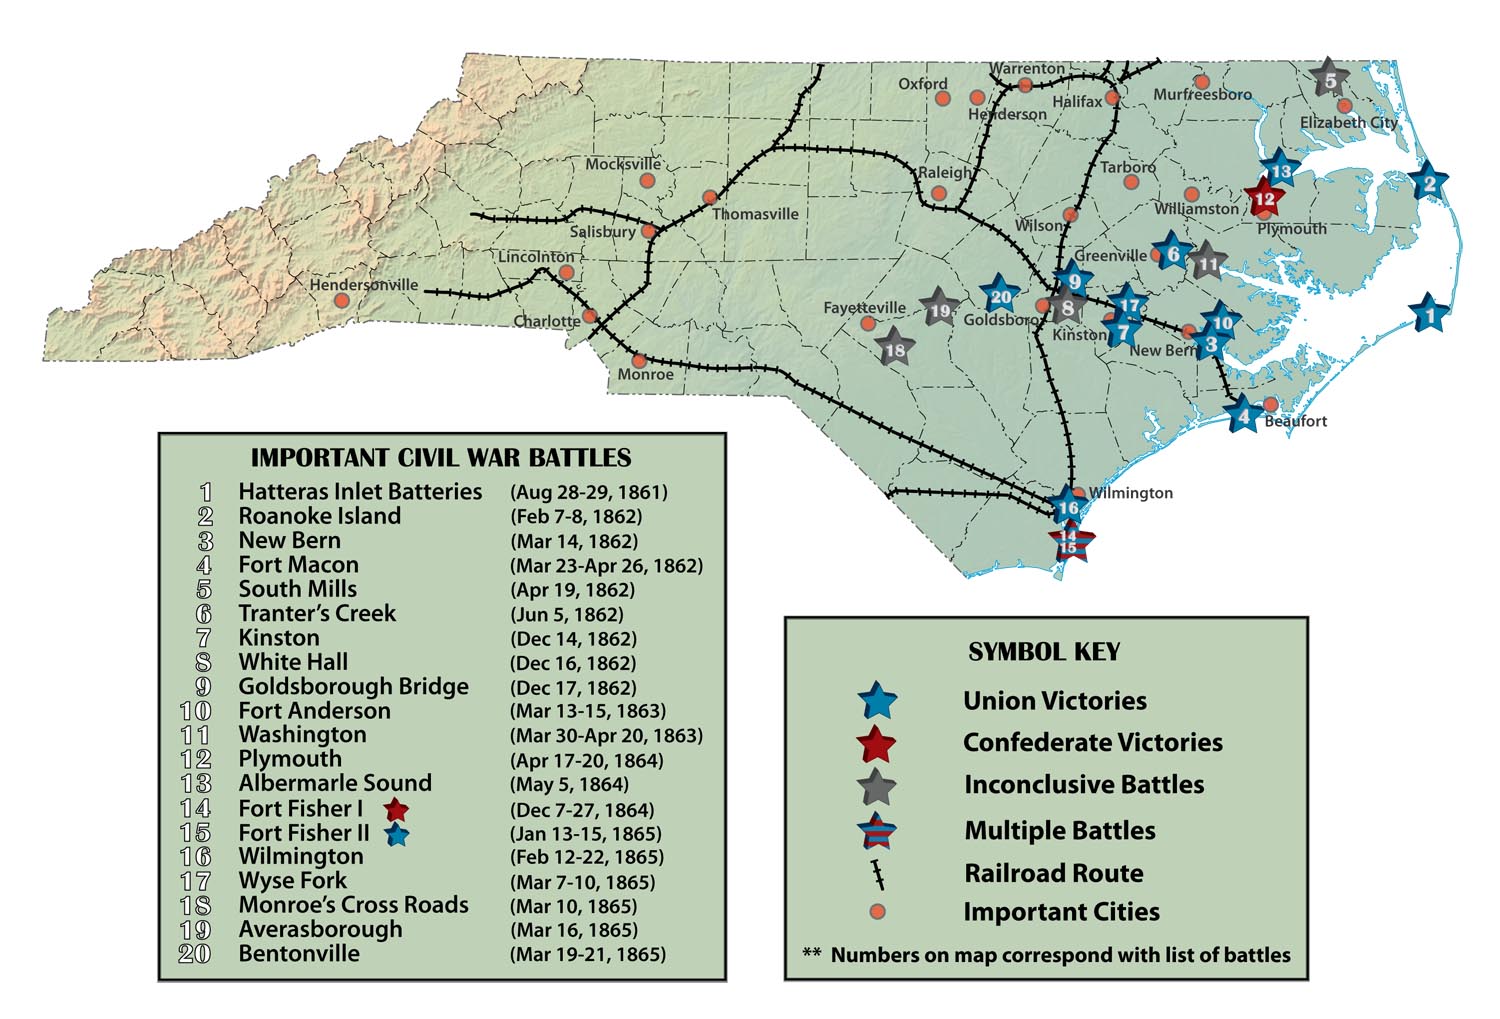 Map of Civil War battles in North Carolina, including railroads and major towns.